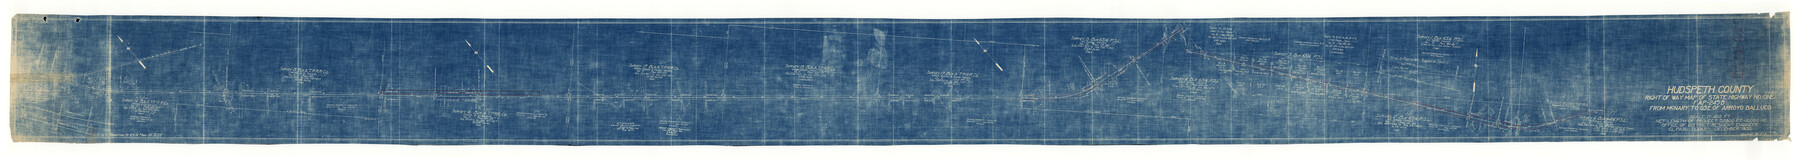 9216, Hudspeth County Rolled Sketch 43, General Map Collection